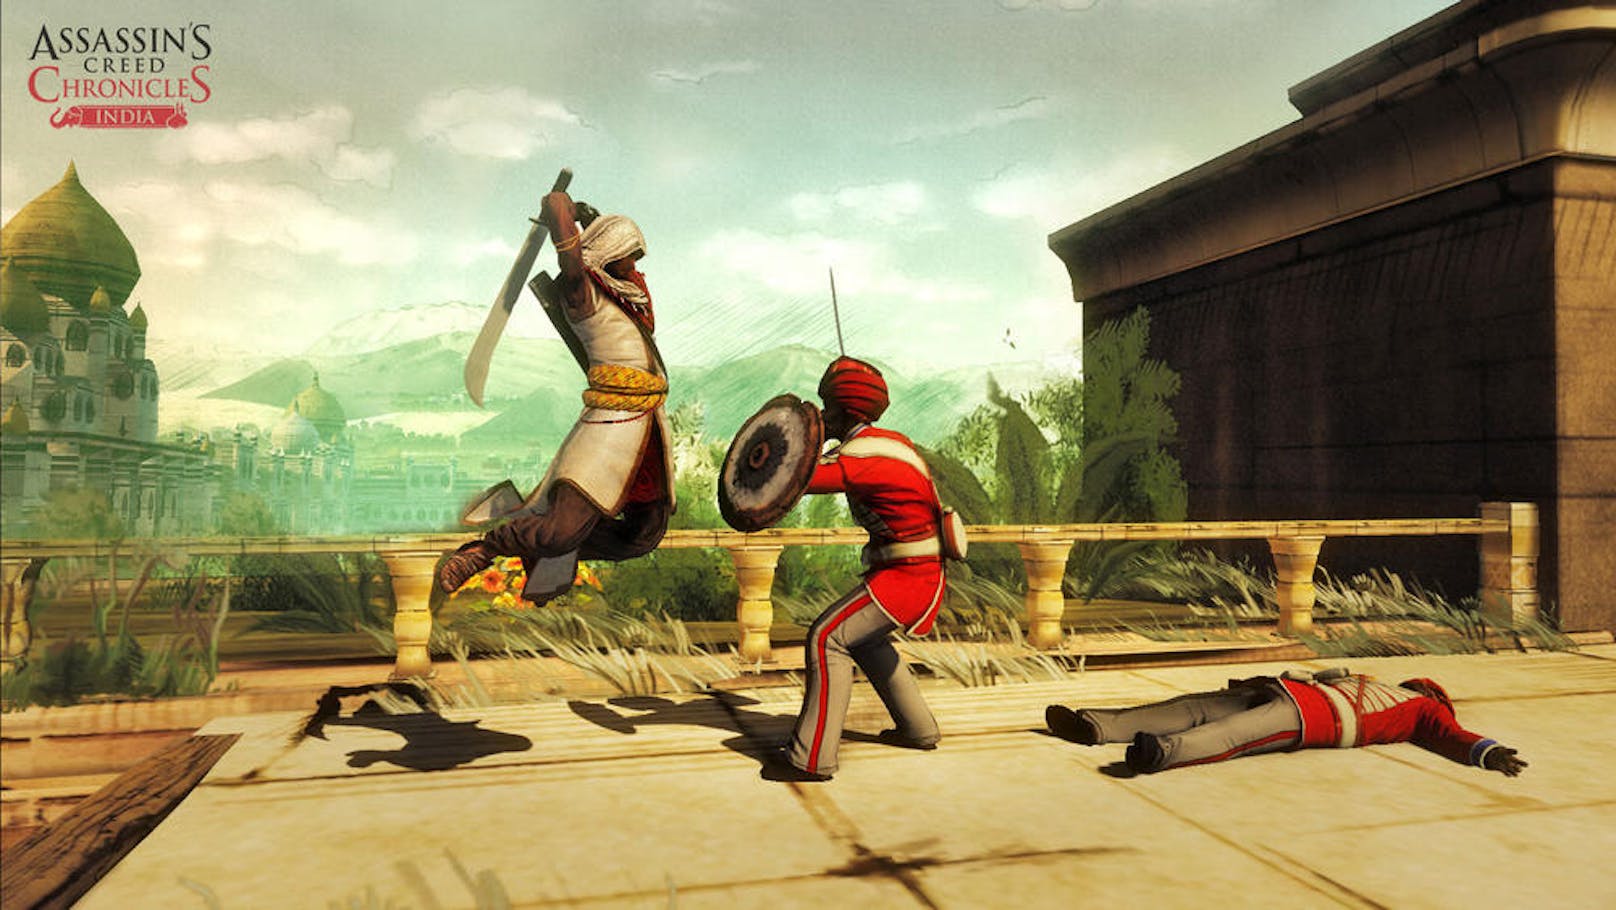  <a href="https://www.heute.at/digital/games/story/Assassin-s-Creed-Chronicles--India-im-Test-42092834" target="_blank">Assassin's Creed Chronicles: India</a>